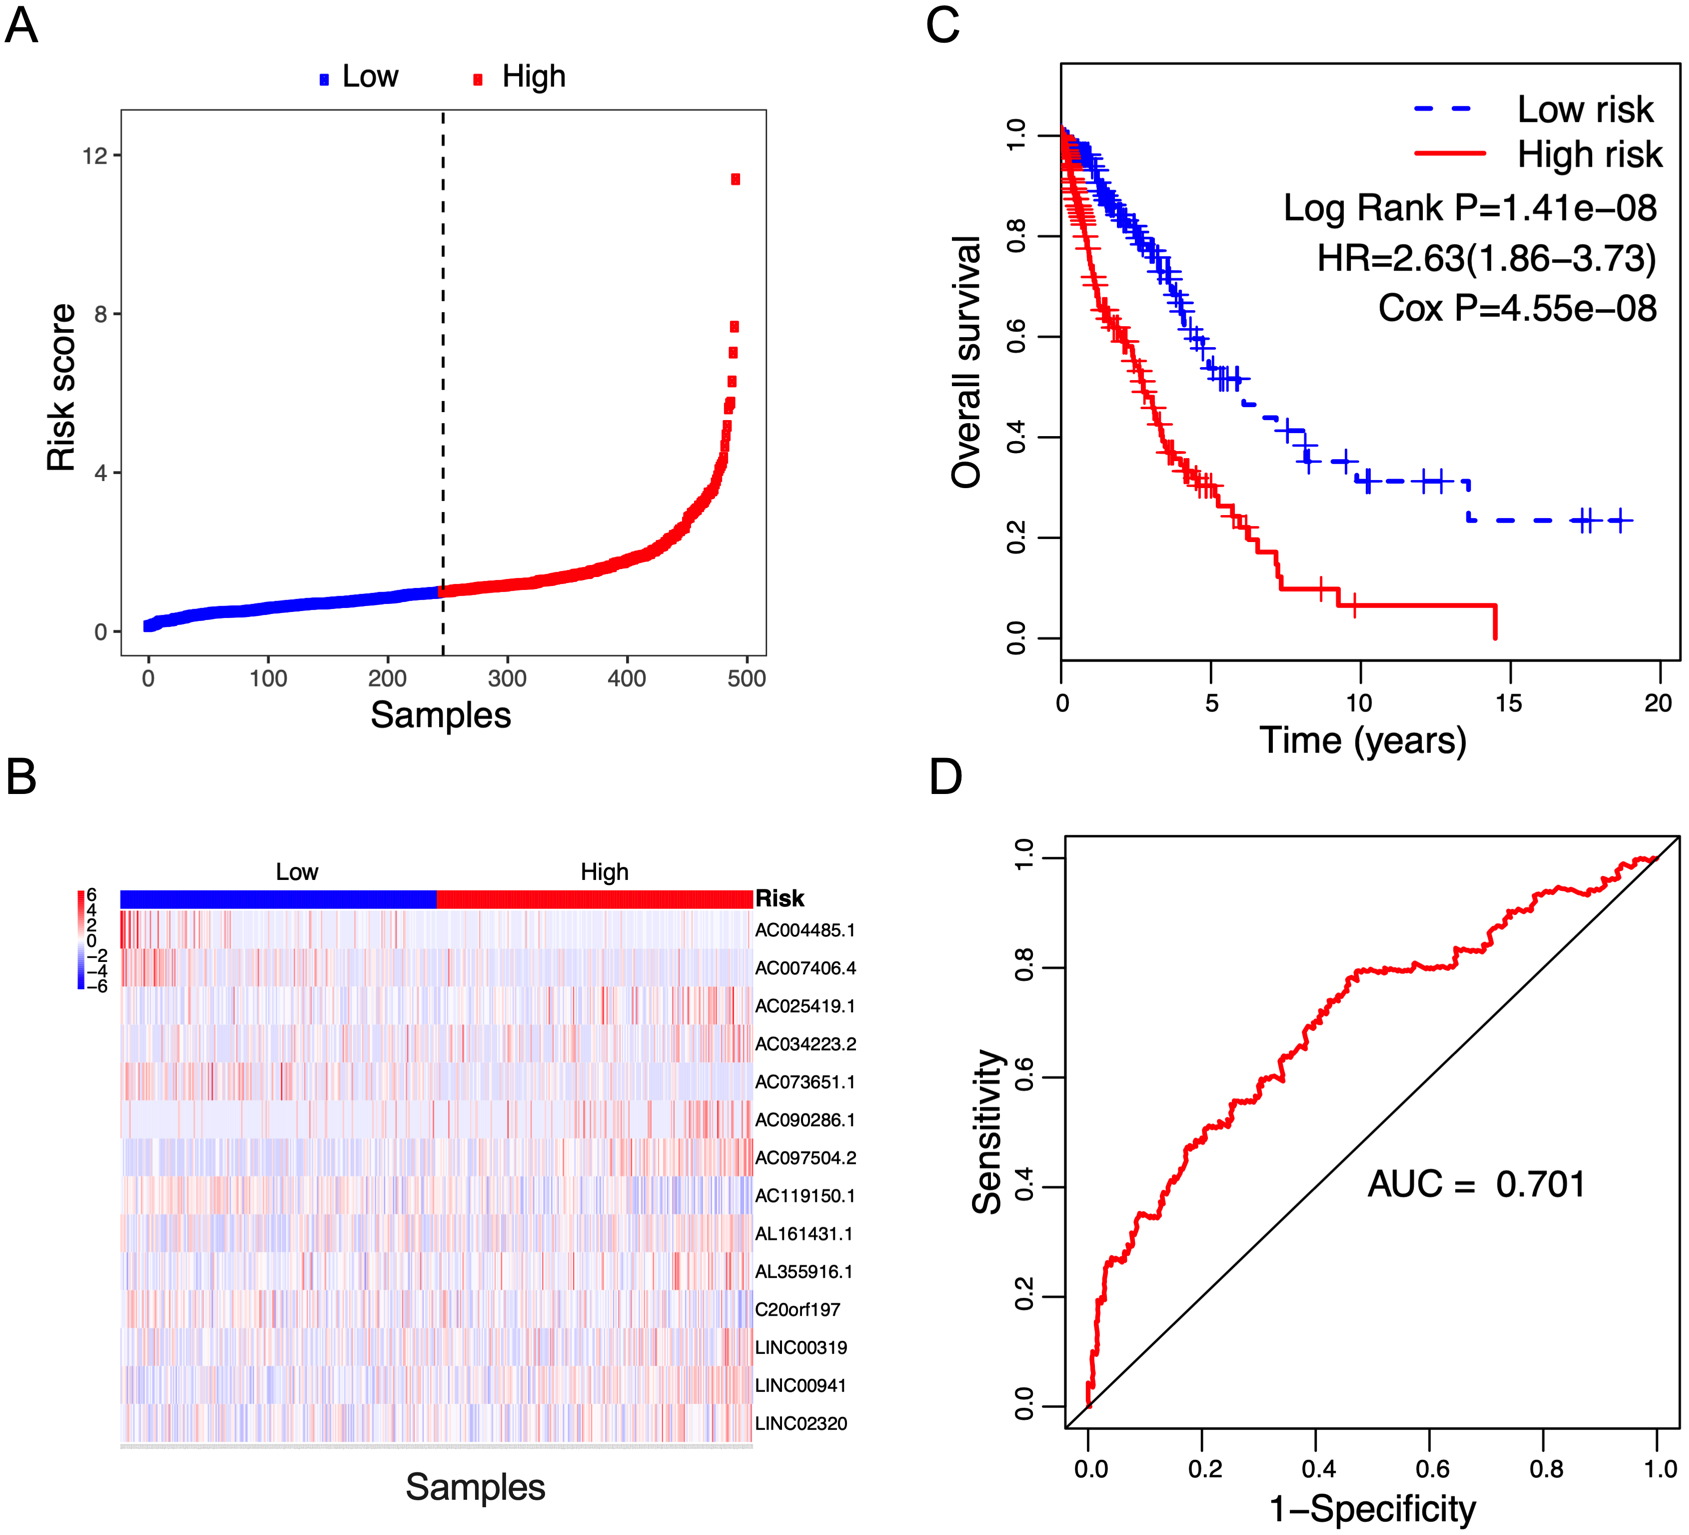 Correlation between the 14-lncRNA signature and overall survival of patients in the validation cohort. A: The distribution of risk scores. The black dotted line represents the median risk score cutoff dividing patients into low-risk and high-risk groups. B: The expression heatmap of the 14 prognostic lncRNAs. C: Kaplan-Meier curves of overall survival between low-risk and high-risk groups. D: ROC curve for survival prediction by 14-lncRNA signature showing an AUC of 0.701.